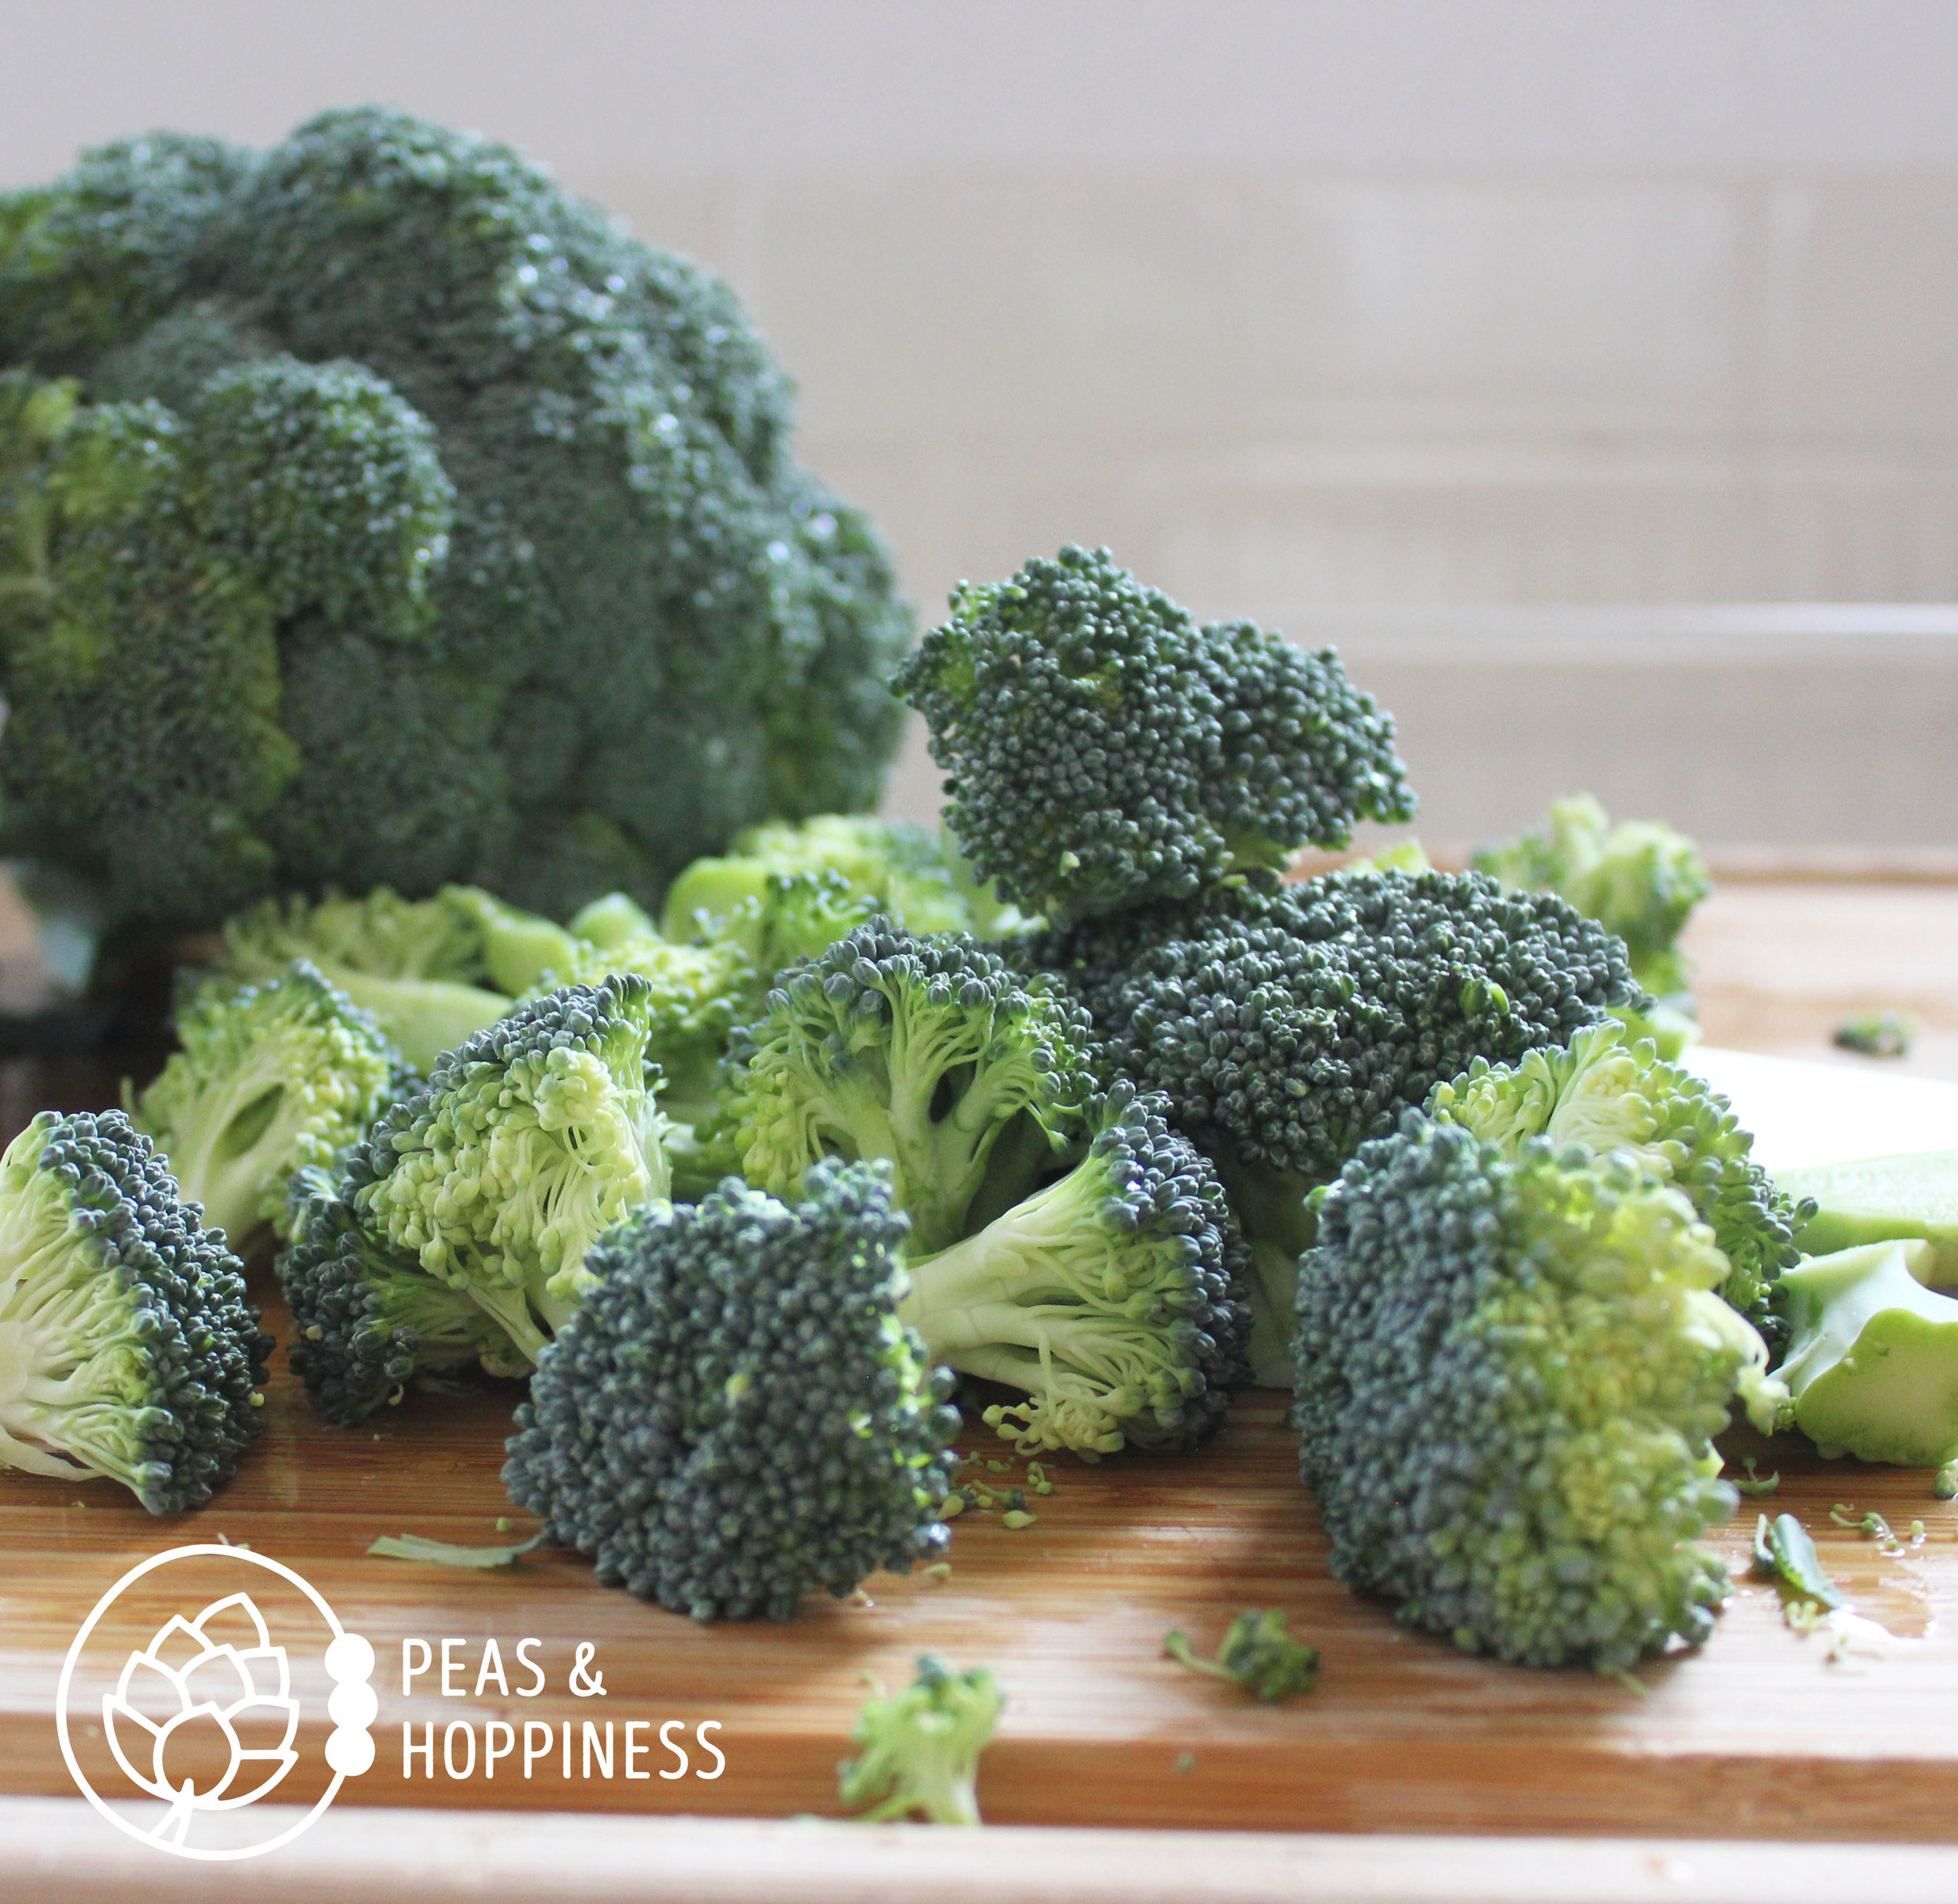 Broccoli is basic, high in antioxidants, AND high in calcium - good for all kinds of things! Try this recipe for Crowd-Pleasing Roasted Broccoli